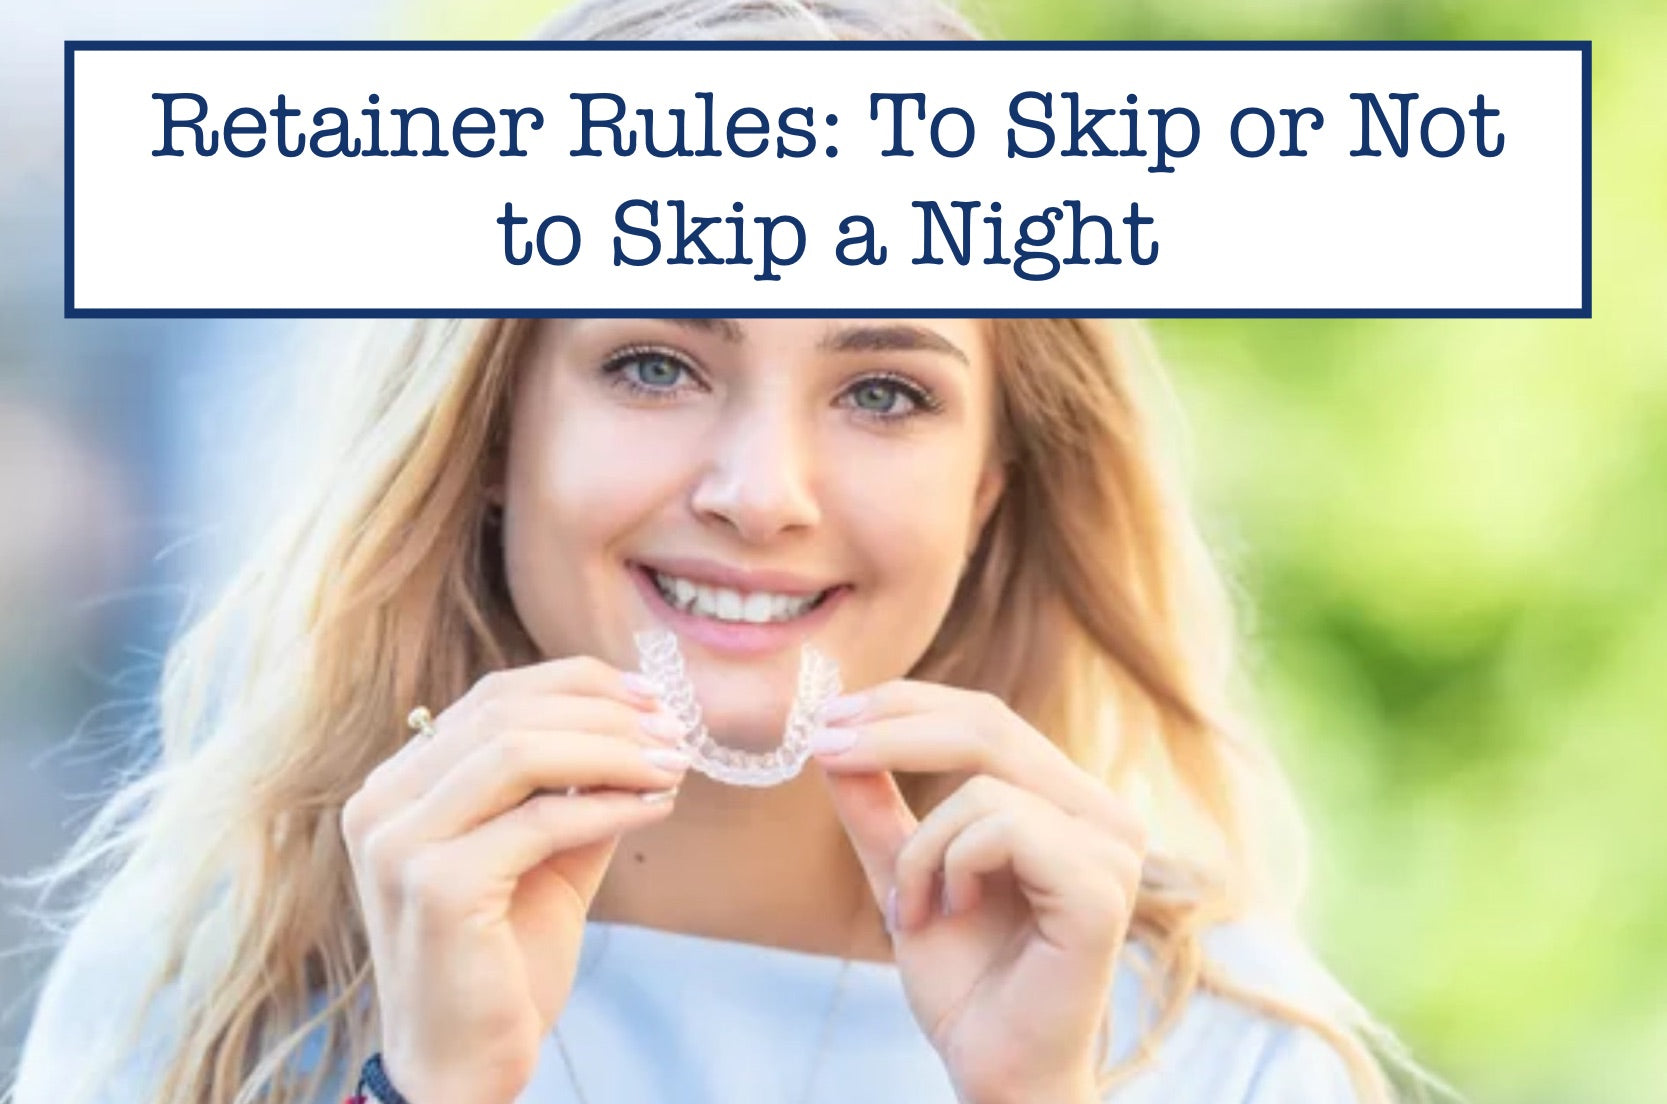 Retainer Rules: To Skip or Not to Skip a Night